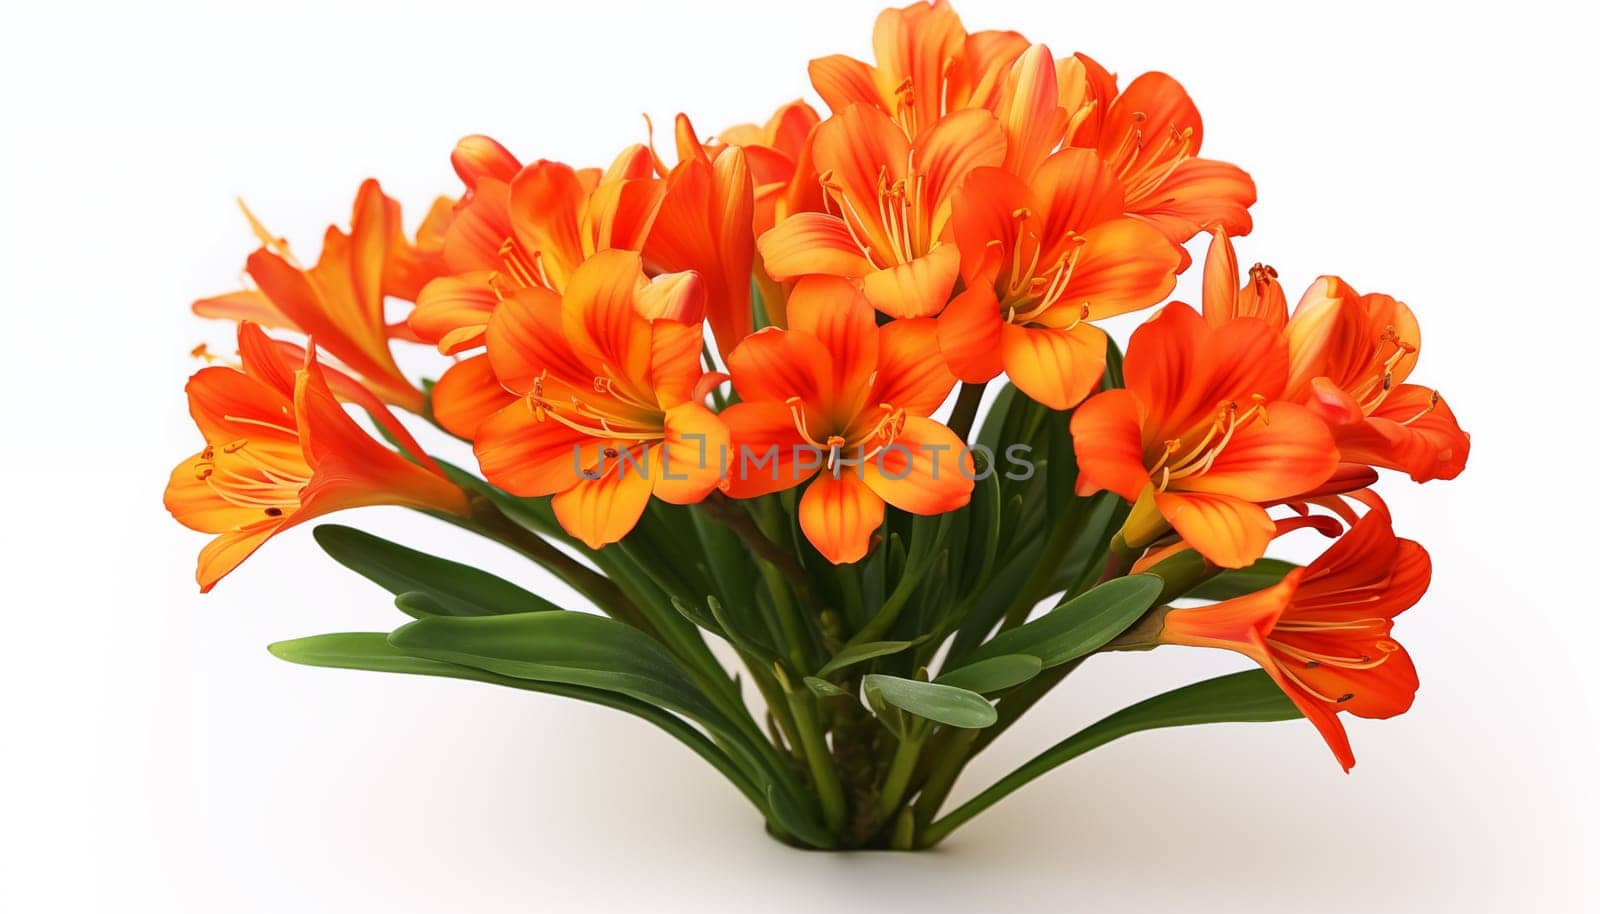 Clivia plant by Nadtochiy